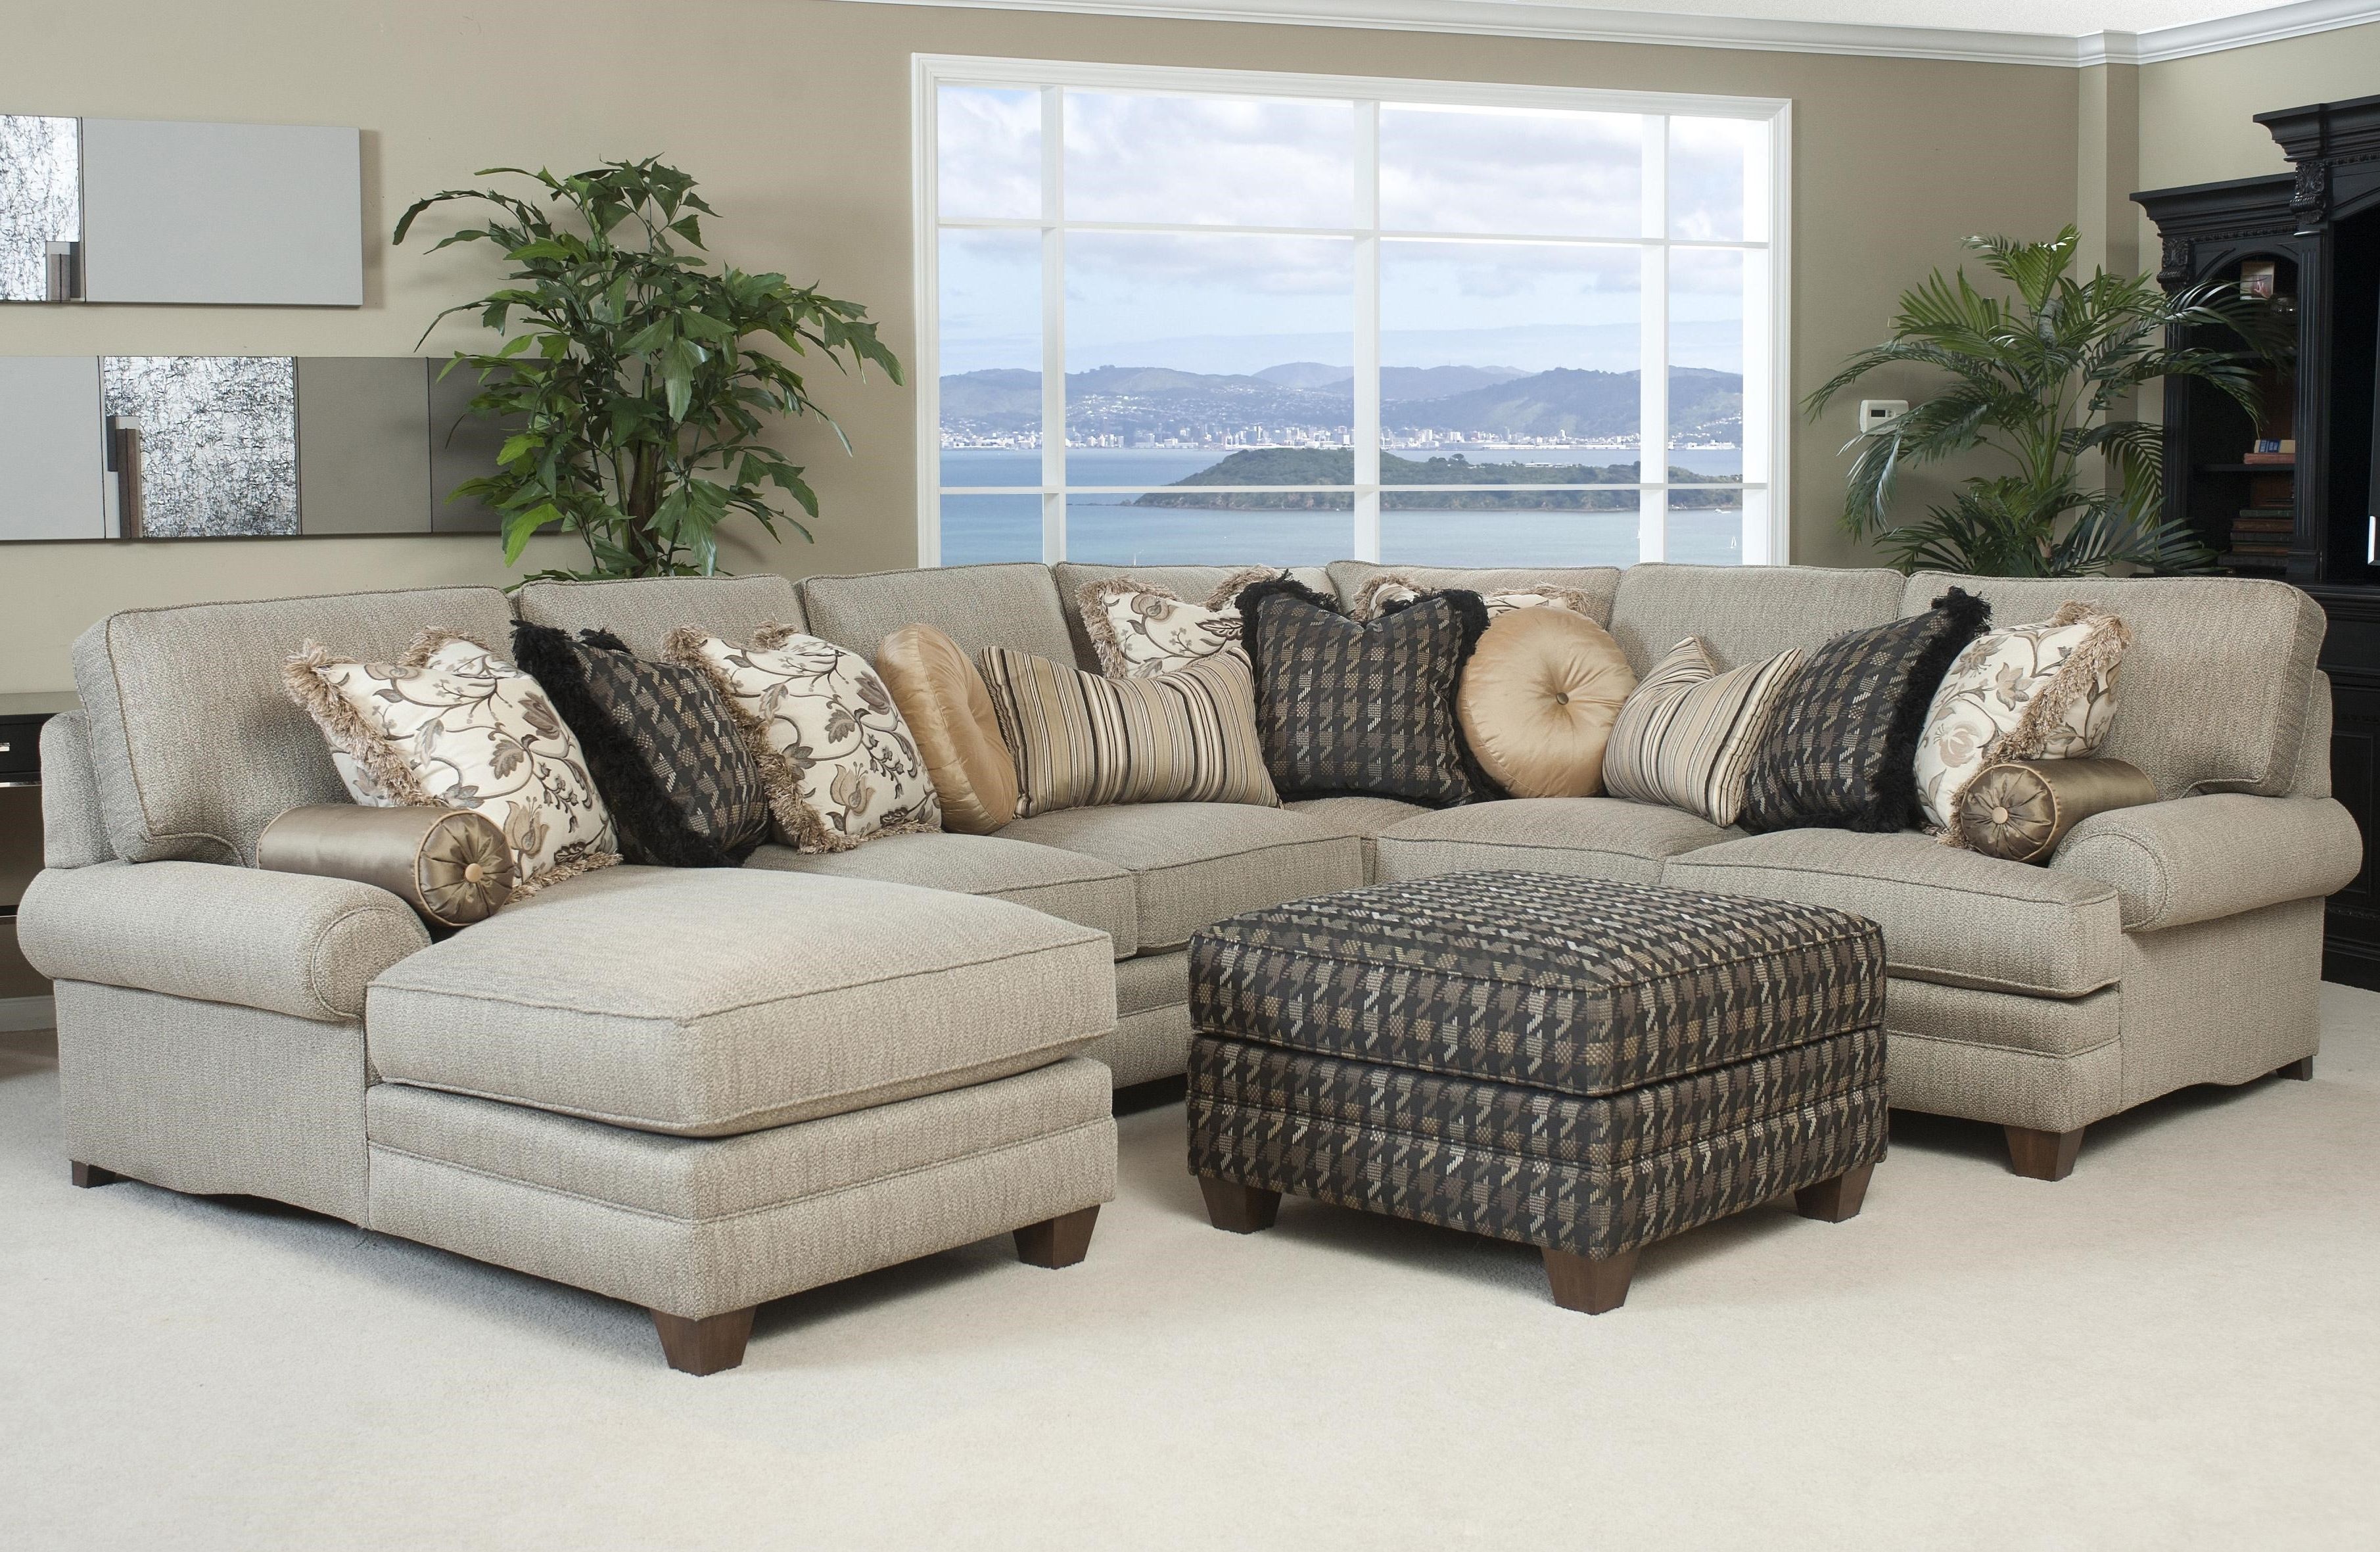 Stylish Sectional Sofas Tulsa – Buildsimplehome Intended For Newest Tulsa Sectional Sofas (View 6 of 20)